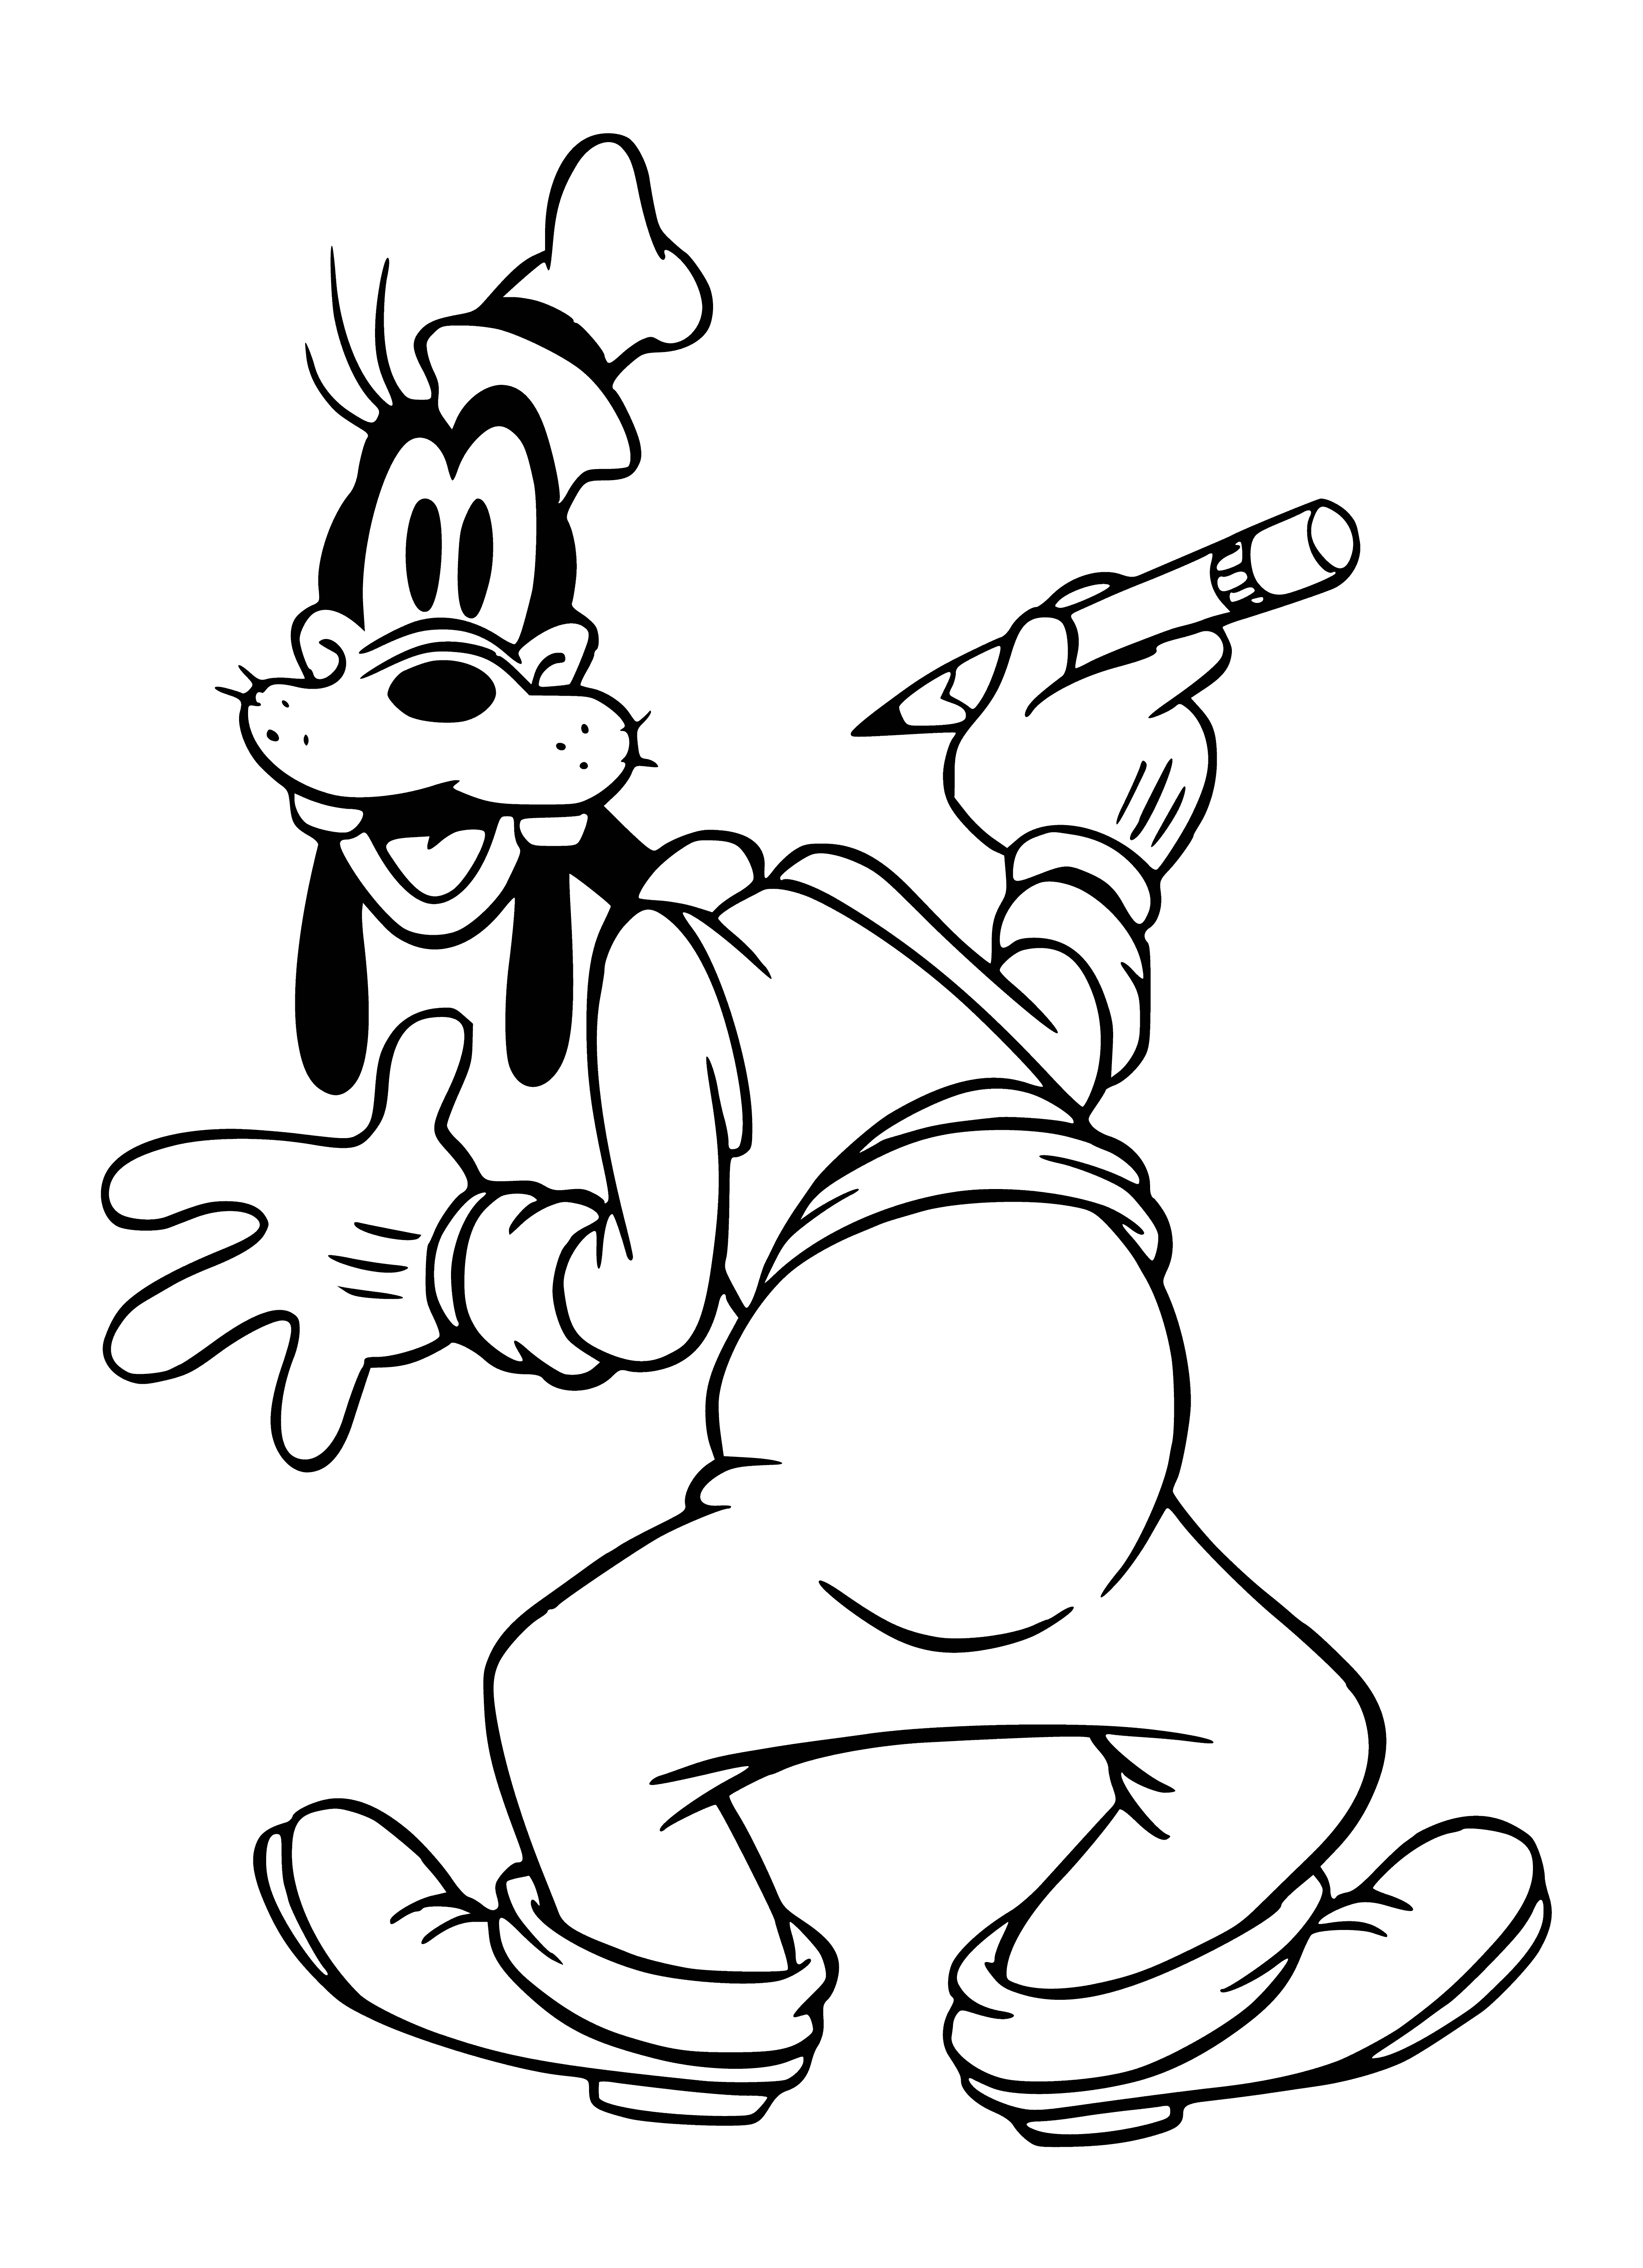 Goofy-artist coloring page